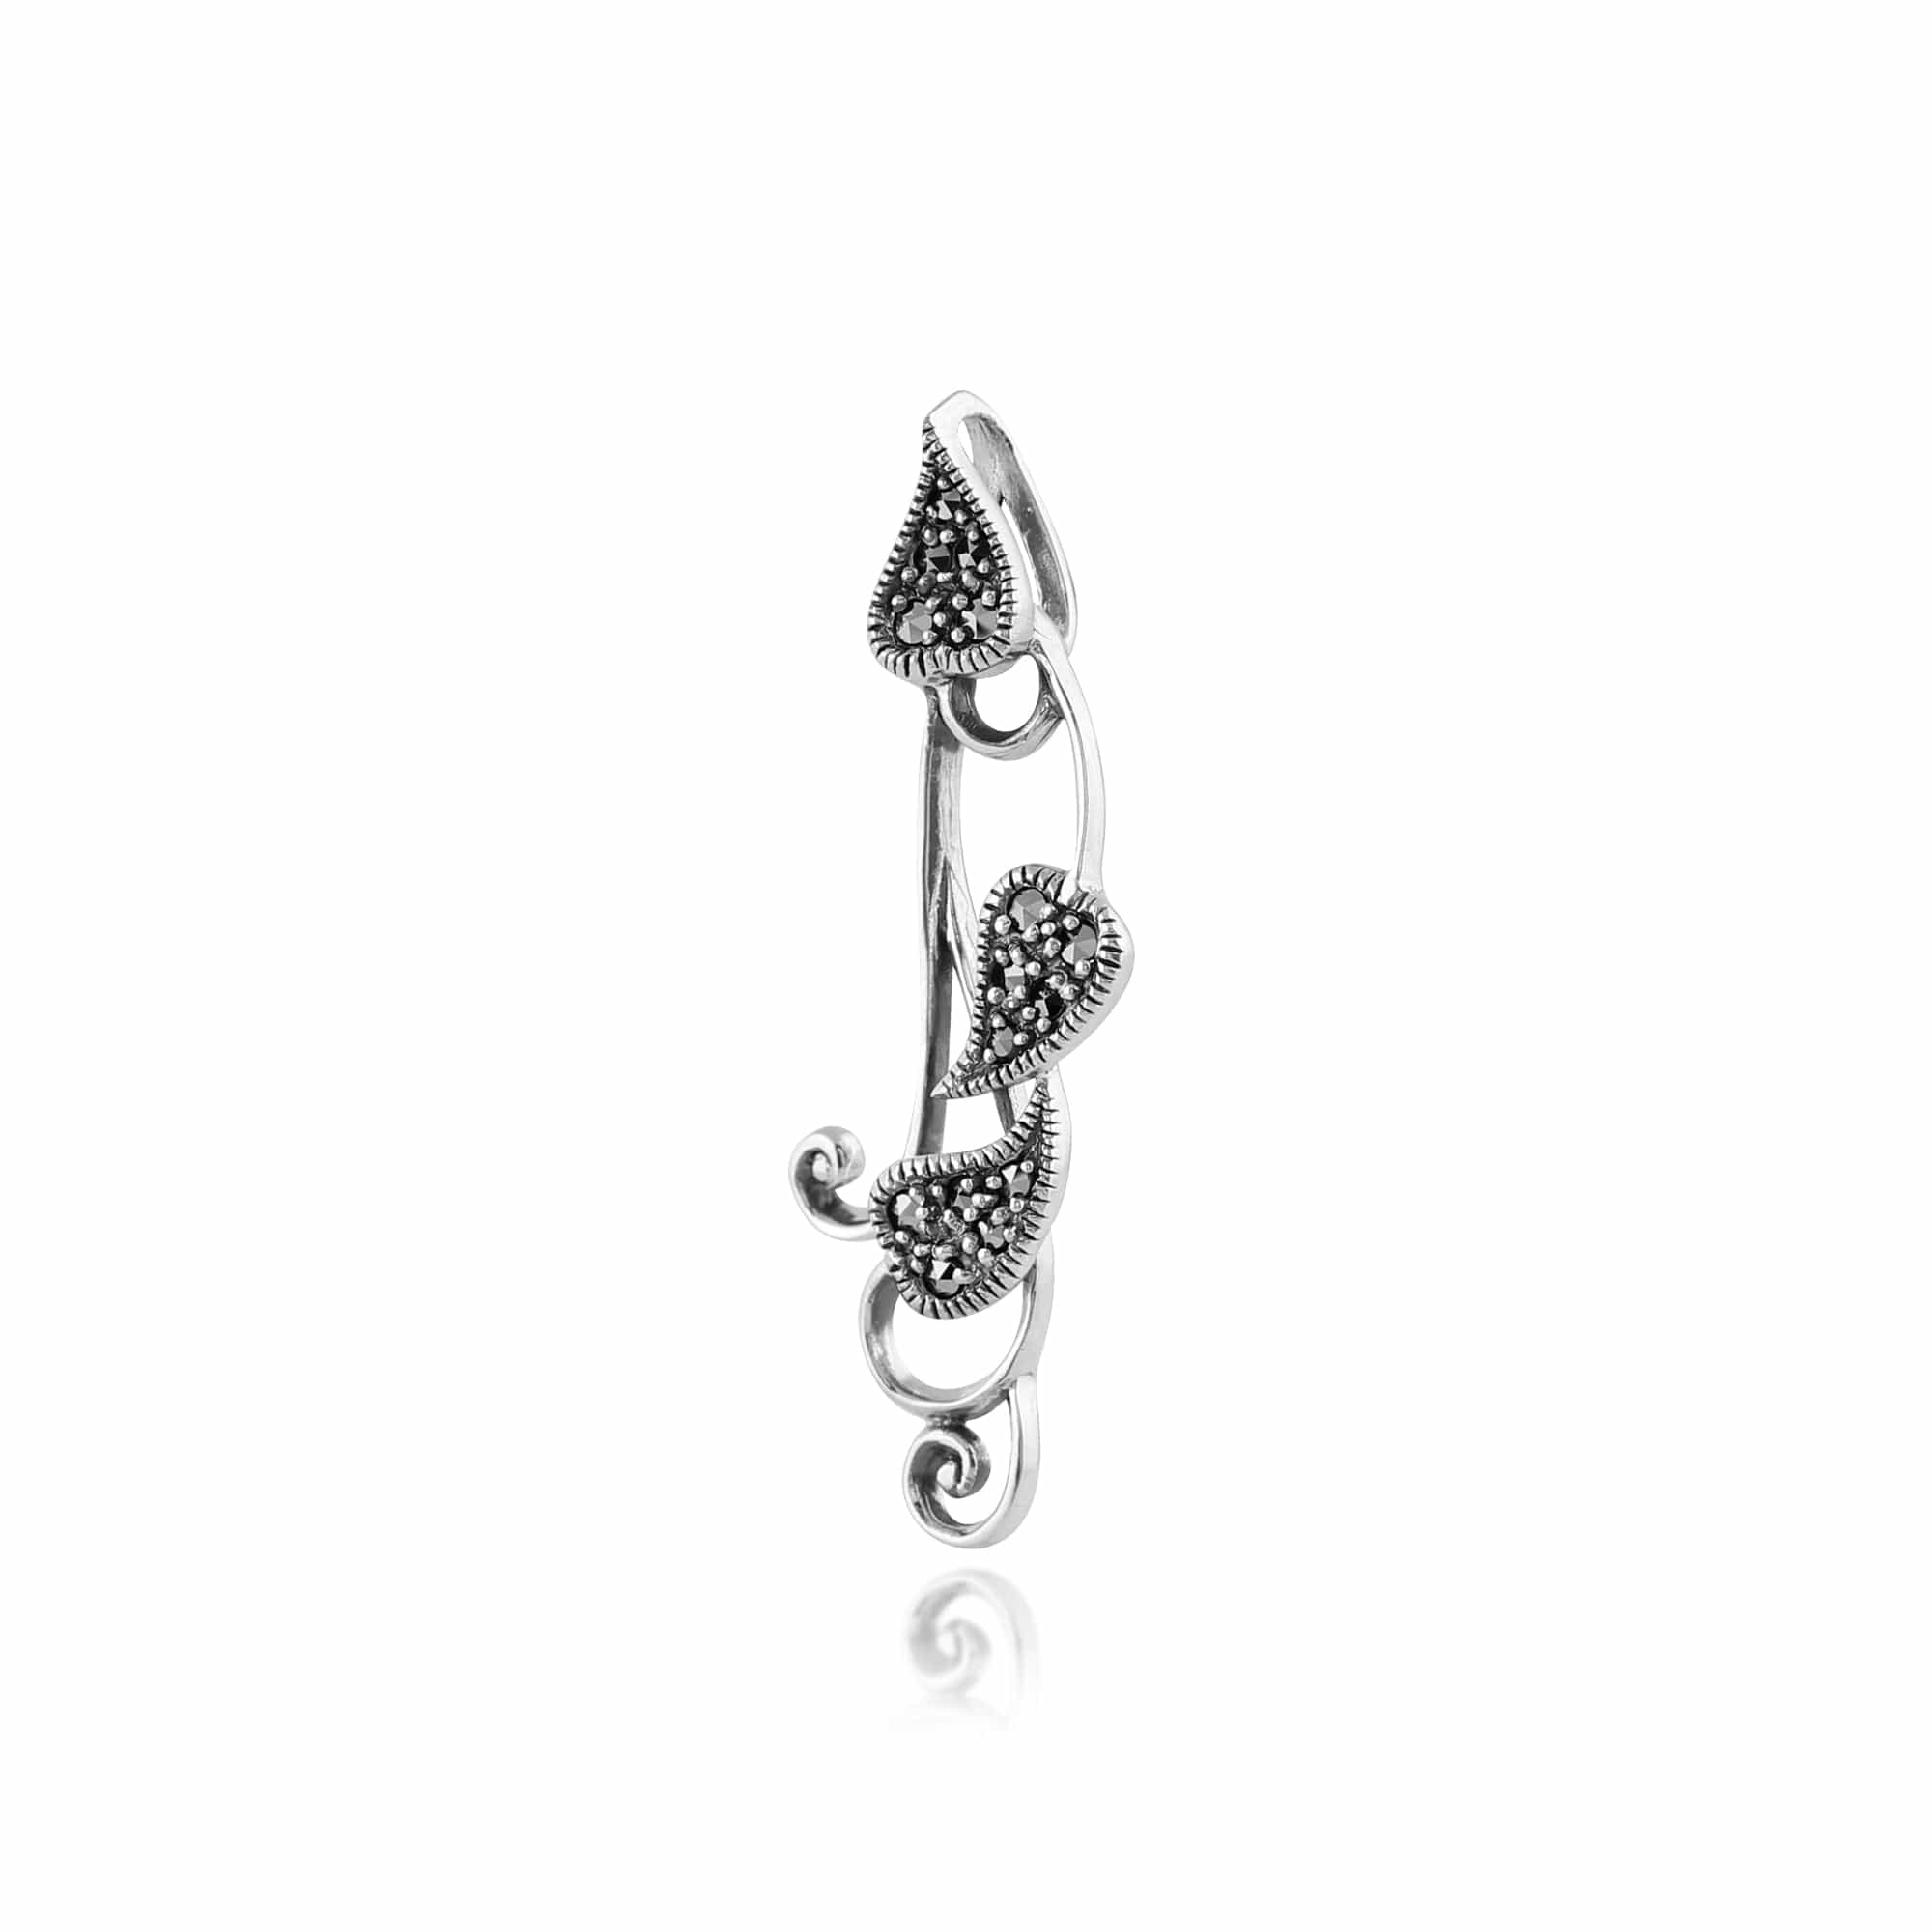 214E661201925-214P214901925 Art Nouveau Style Style Round Marcasite Twisted Leaf Drop Earrings & Pendant Set in 925 Sterling Silver 5